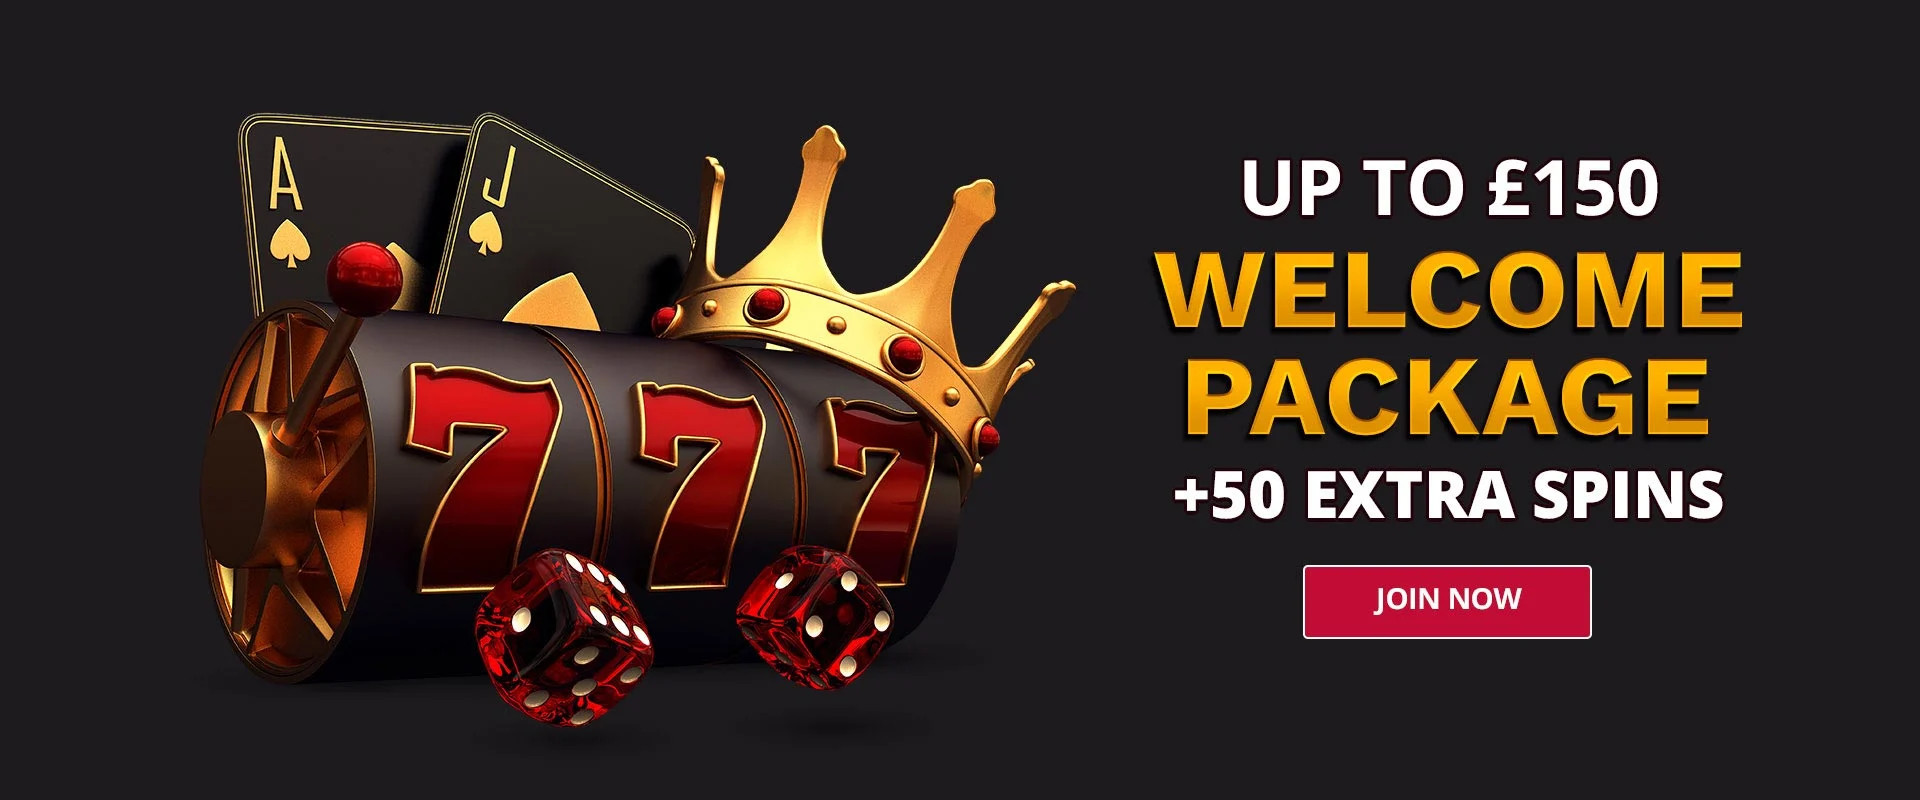 King Casino Welcome Offer